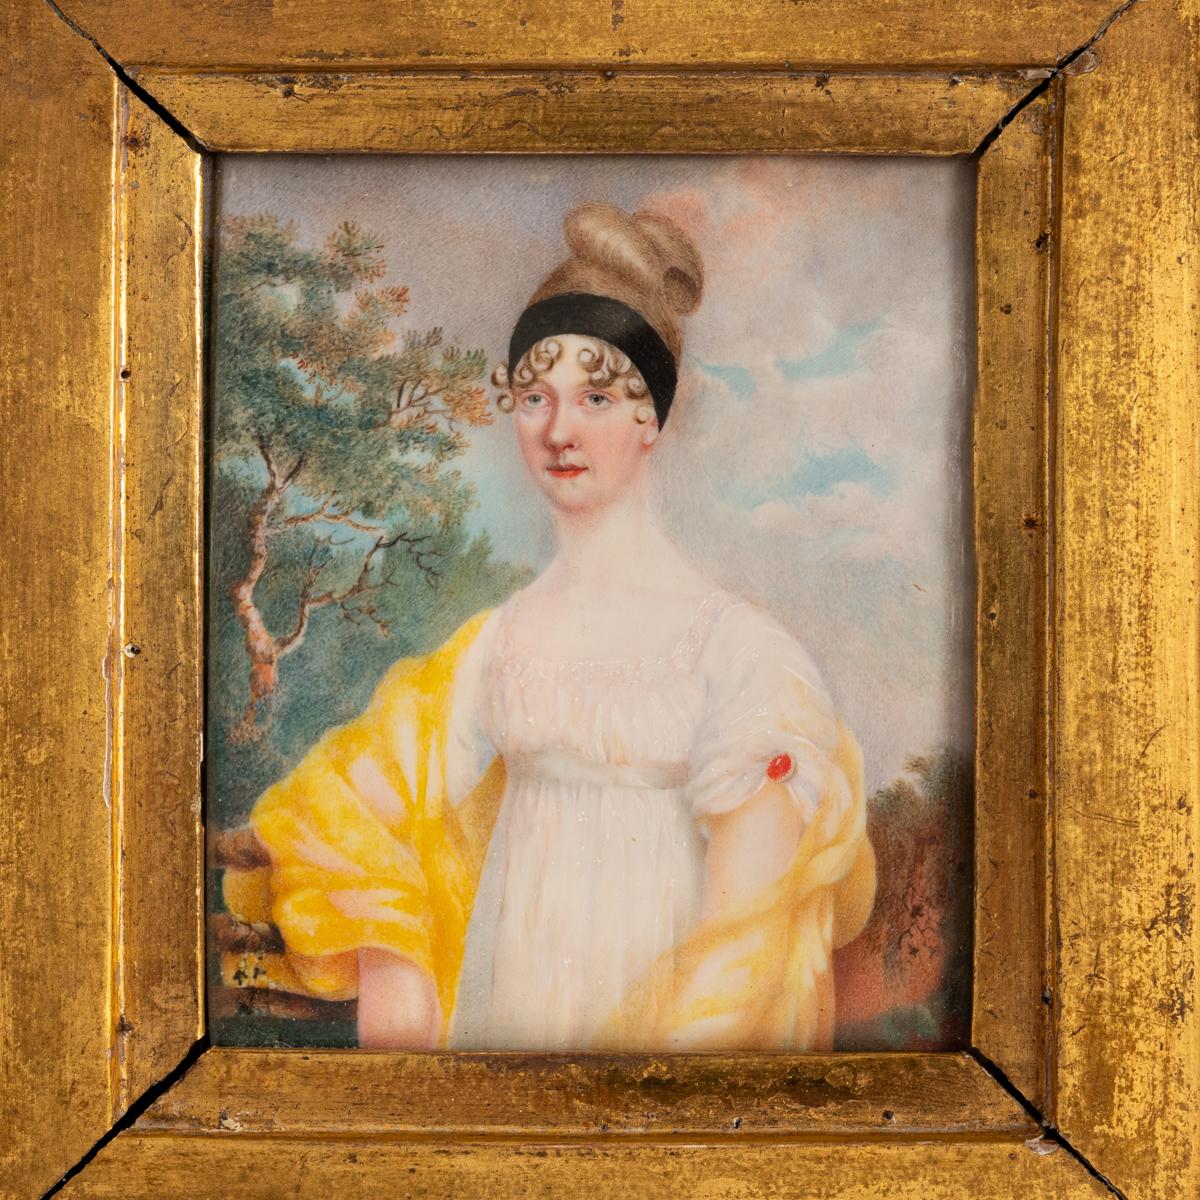 A good antique Georgian Regency period miniature portrait of a lady, circa 1810.
This rather unusual & almost peculiar portrait of a lady from the time of Jane Austen, painted on an ivory wafer and housed in the original gilded gesso & limewood